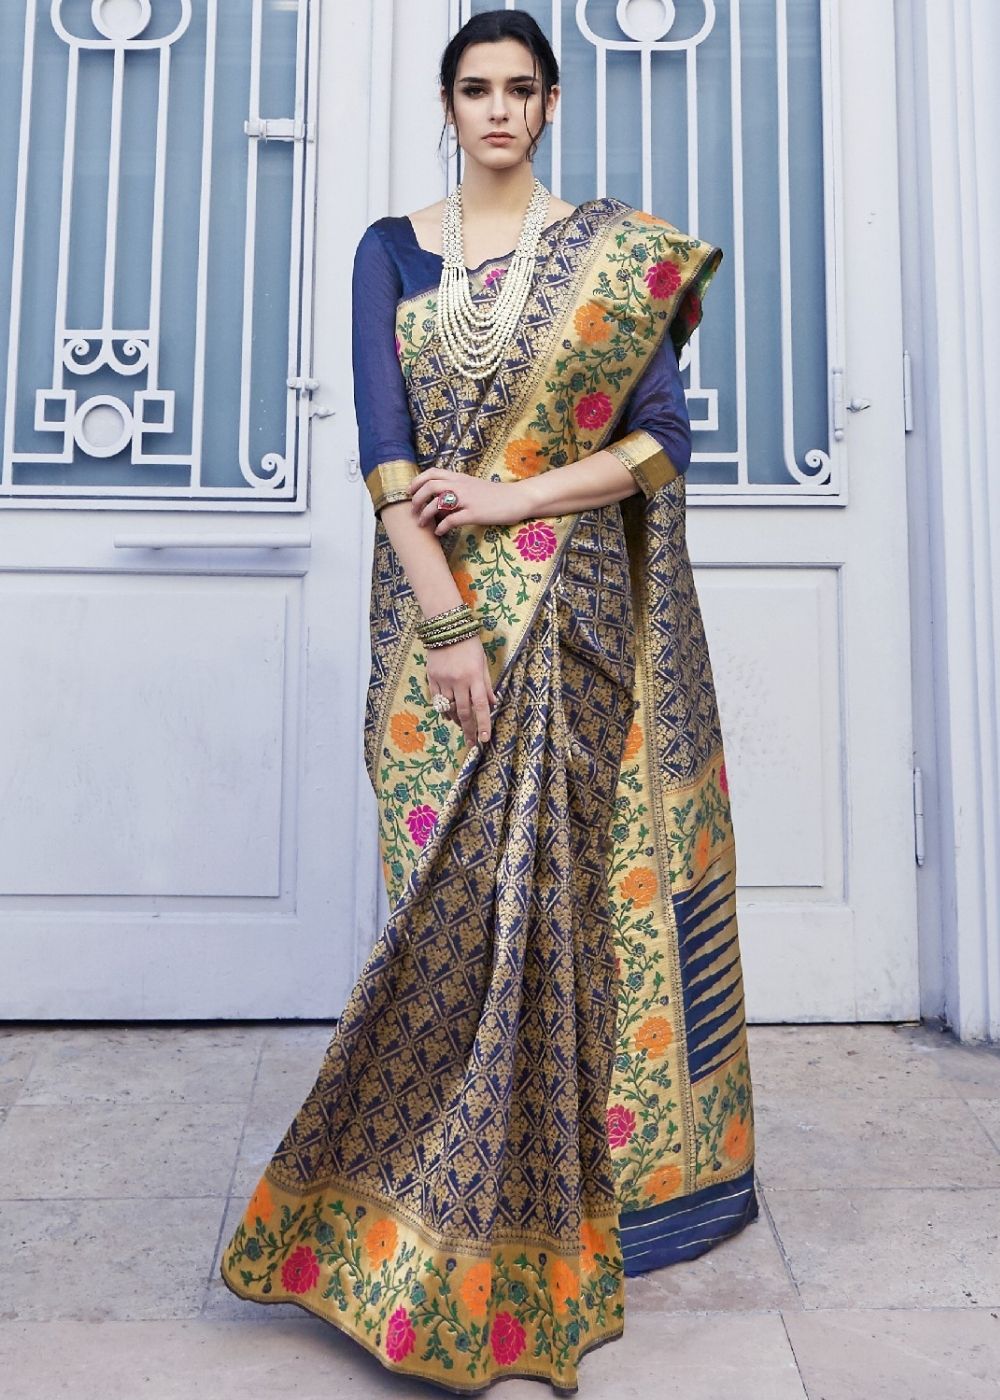 Azure Blue and Golden Blend Silk Saree with Floral Woven Border and Pallu